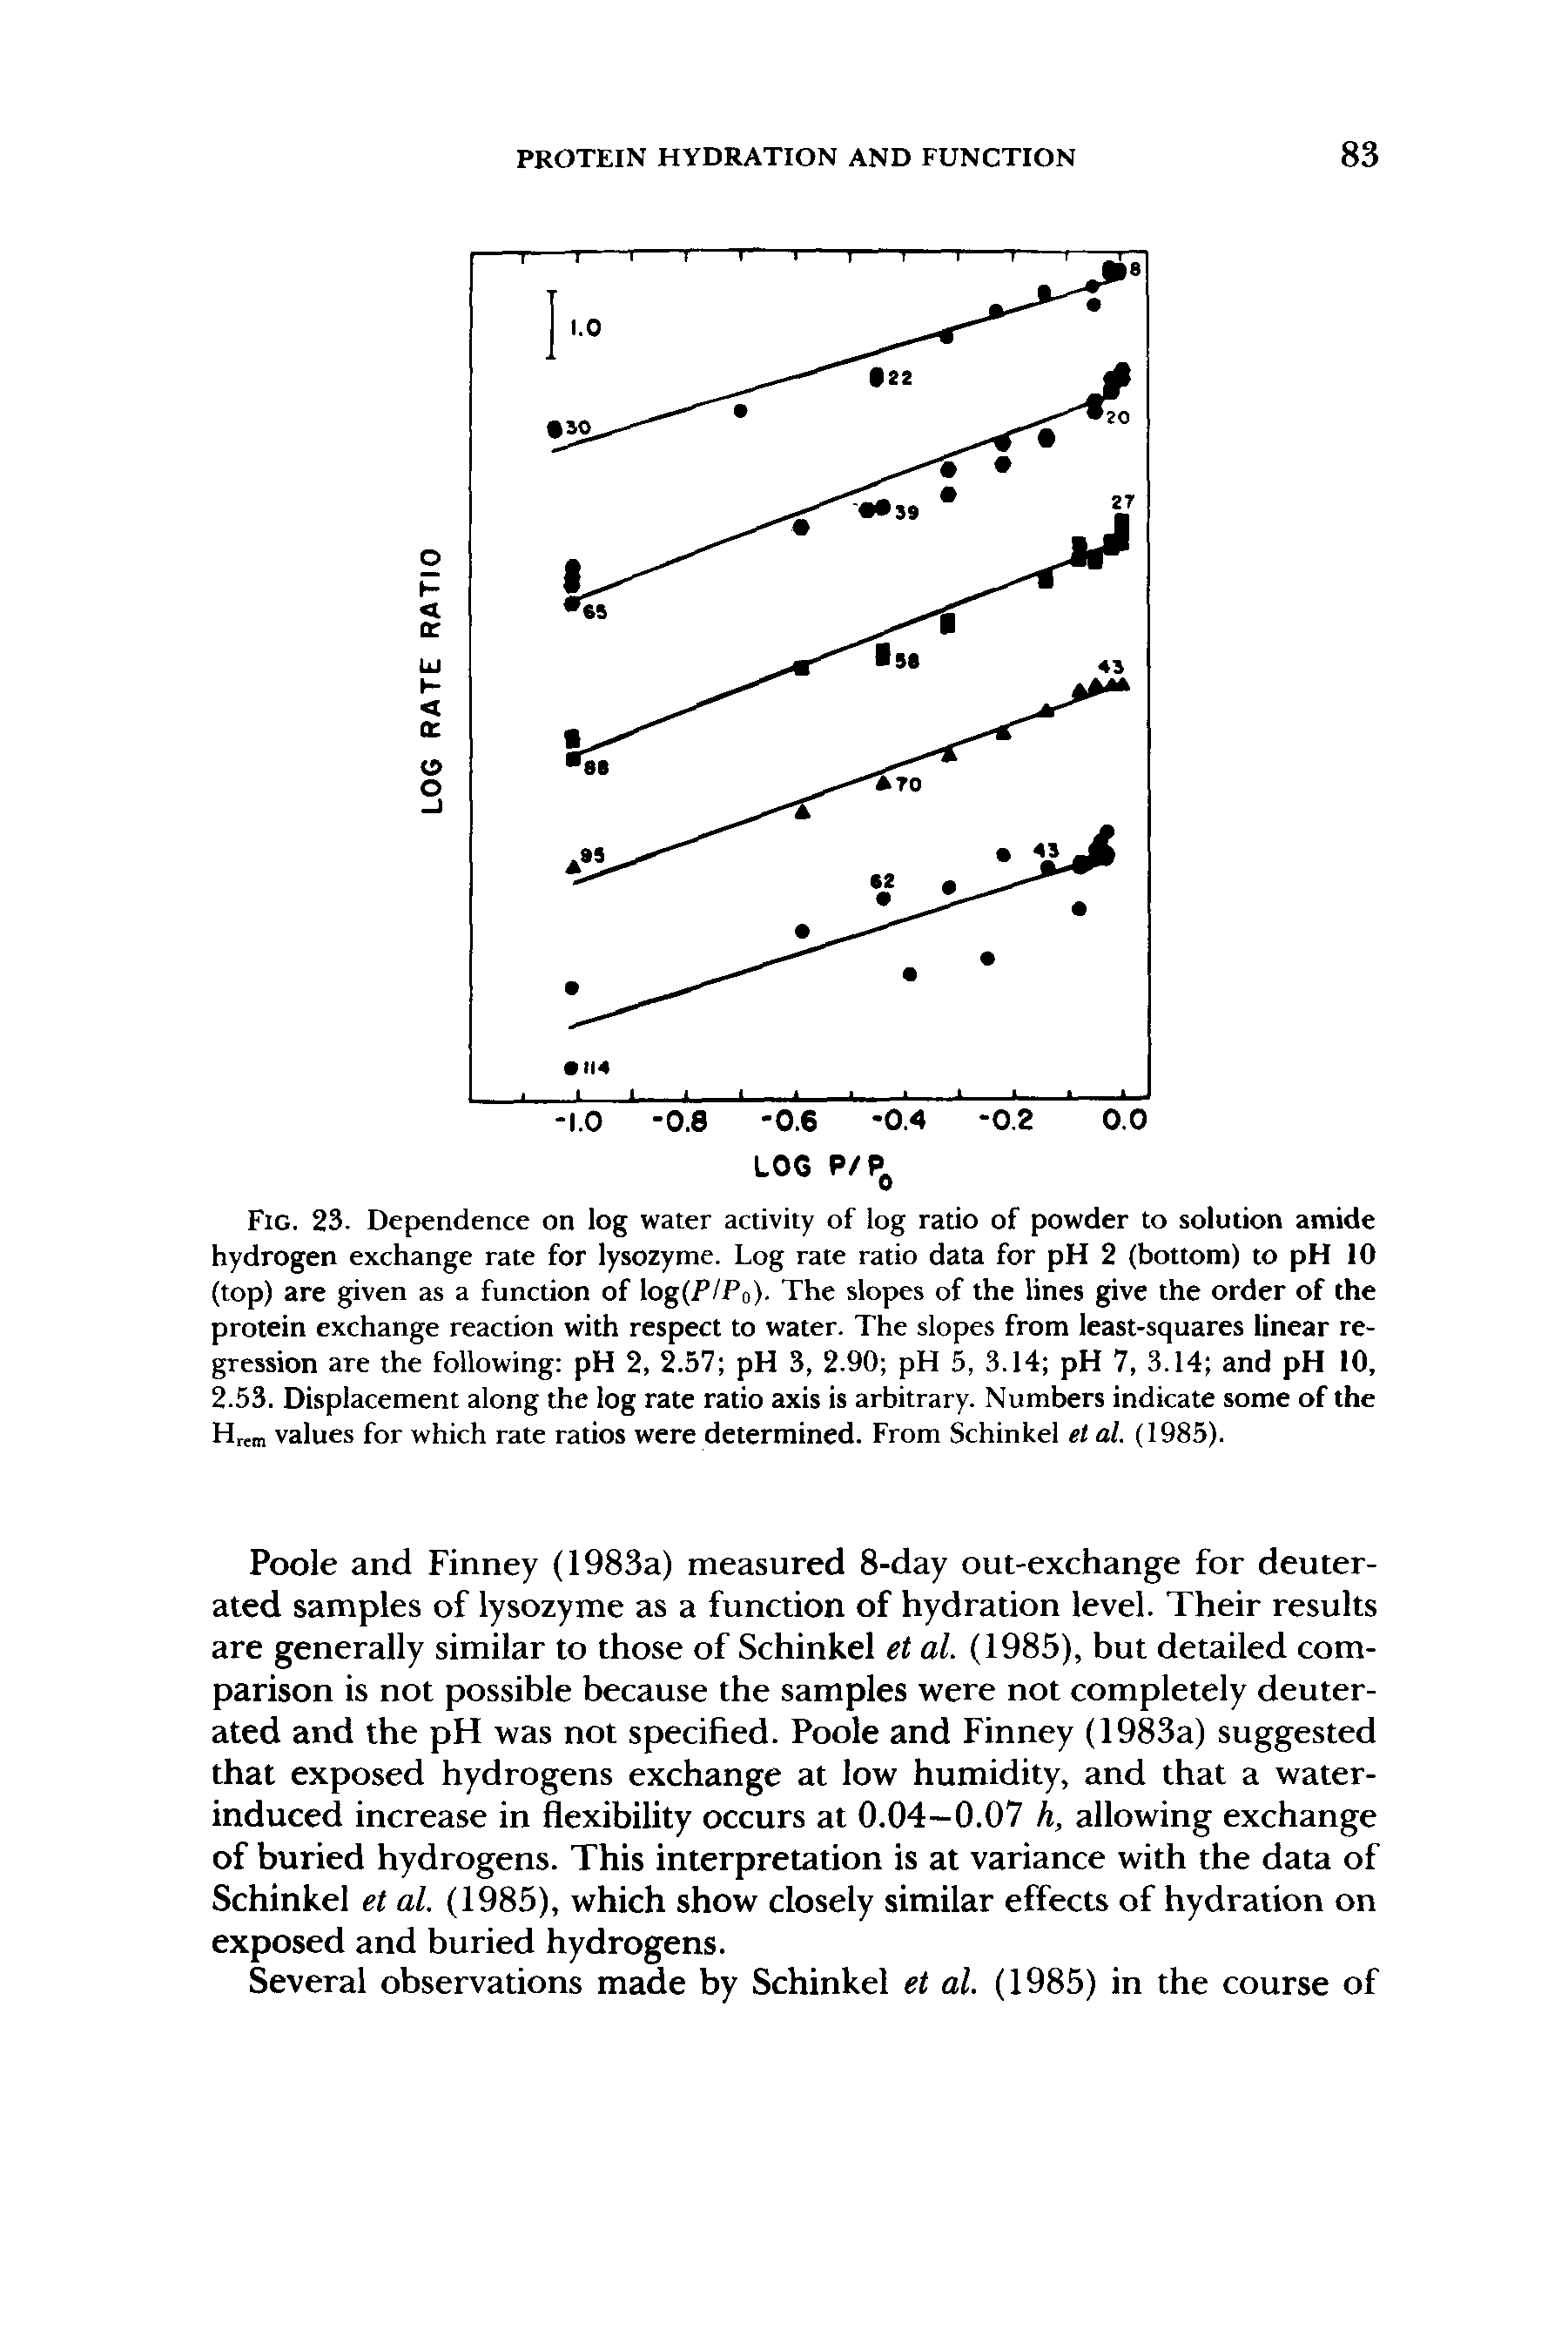 Fig. 23. Dependence on log water activity of log ratio of powder to solution amide hydrogen exchange rate for lysozyme. Log rate ratio data for pH 2 (bottom) to pH 10 (top) are given as a function of log(/ /Po). The slopes of the lines give the order of the protein exchange reaction with respect to water. The slopes from least-squares linear regression are the following pH 2, 2.57 pH 3, 2.90 pH 5, 3.14 pH 7, 3.14 and pH 10, 2.53. Displacement along the log rate ratio axis is arbitrary. Numbers indicate some of the H m values for which rate ratios were determined. From Schinkel et at. (1985).